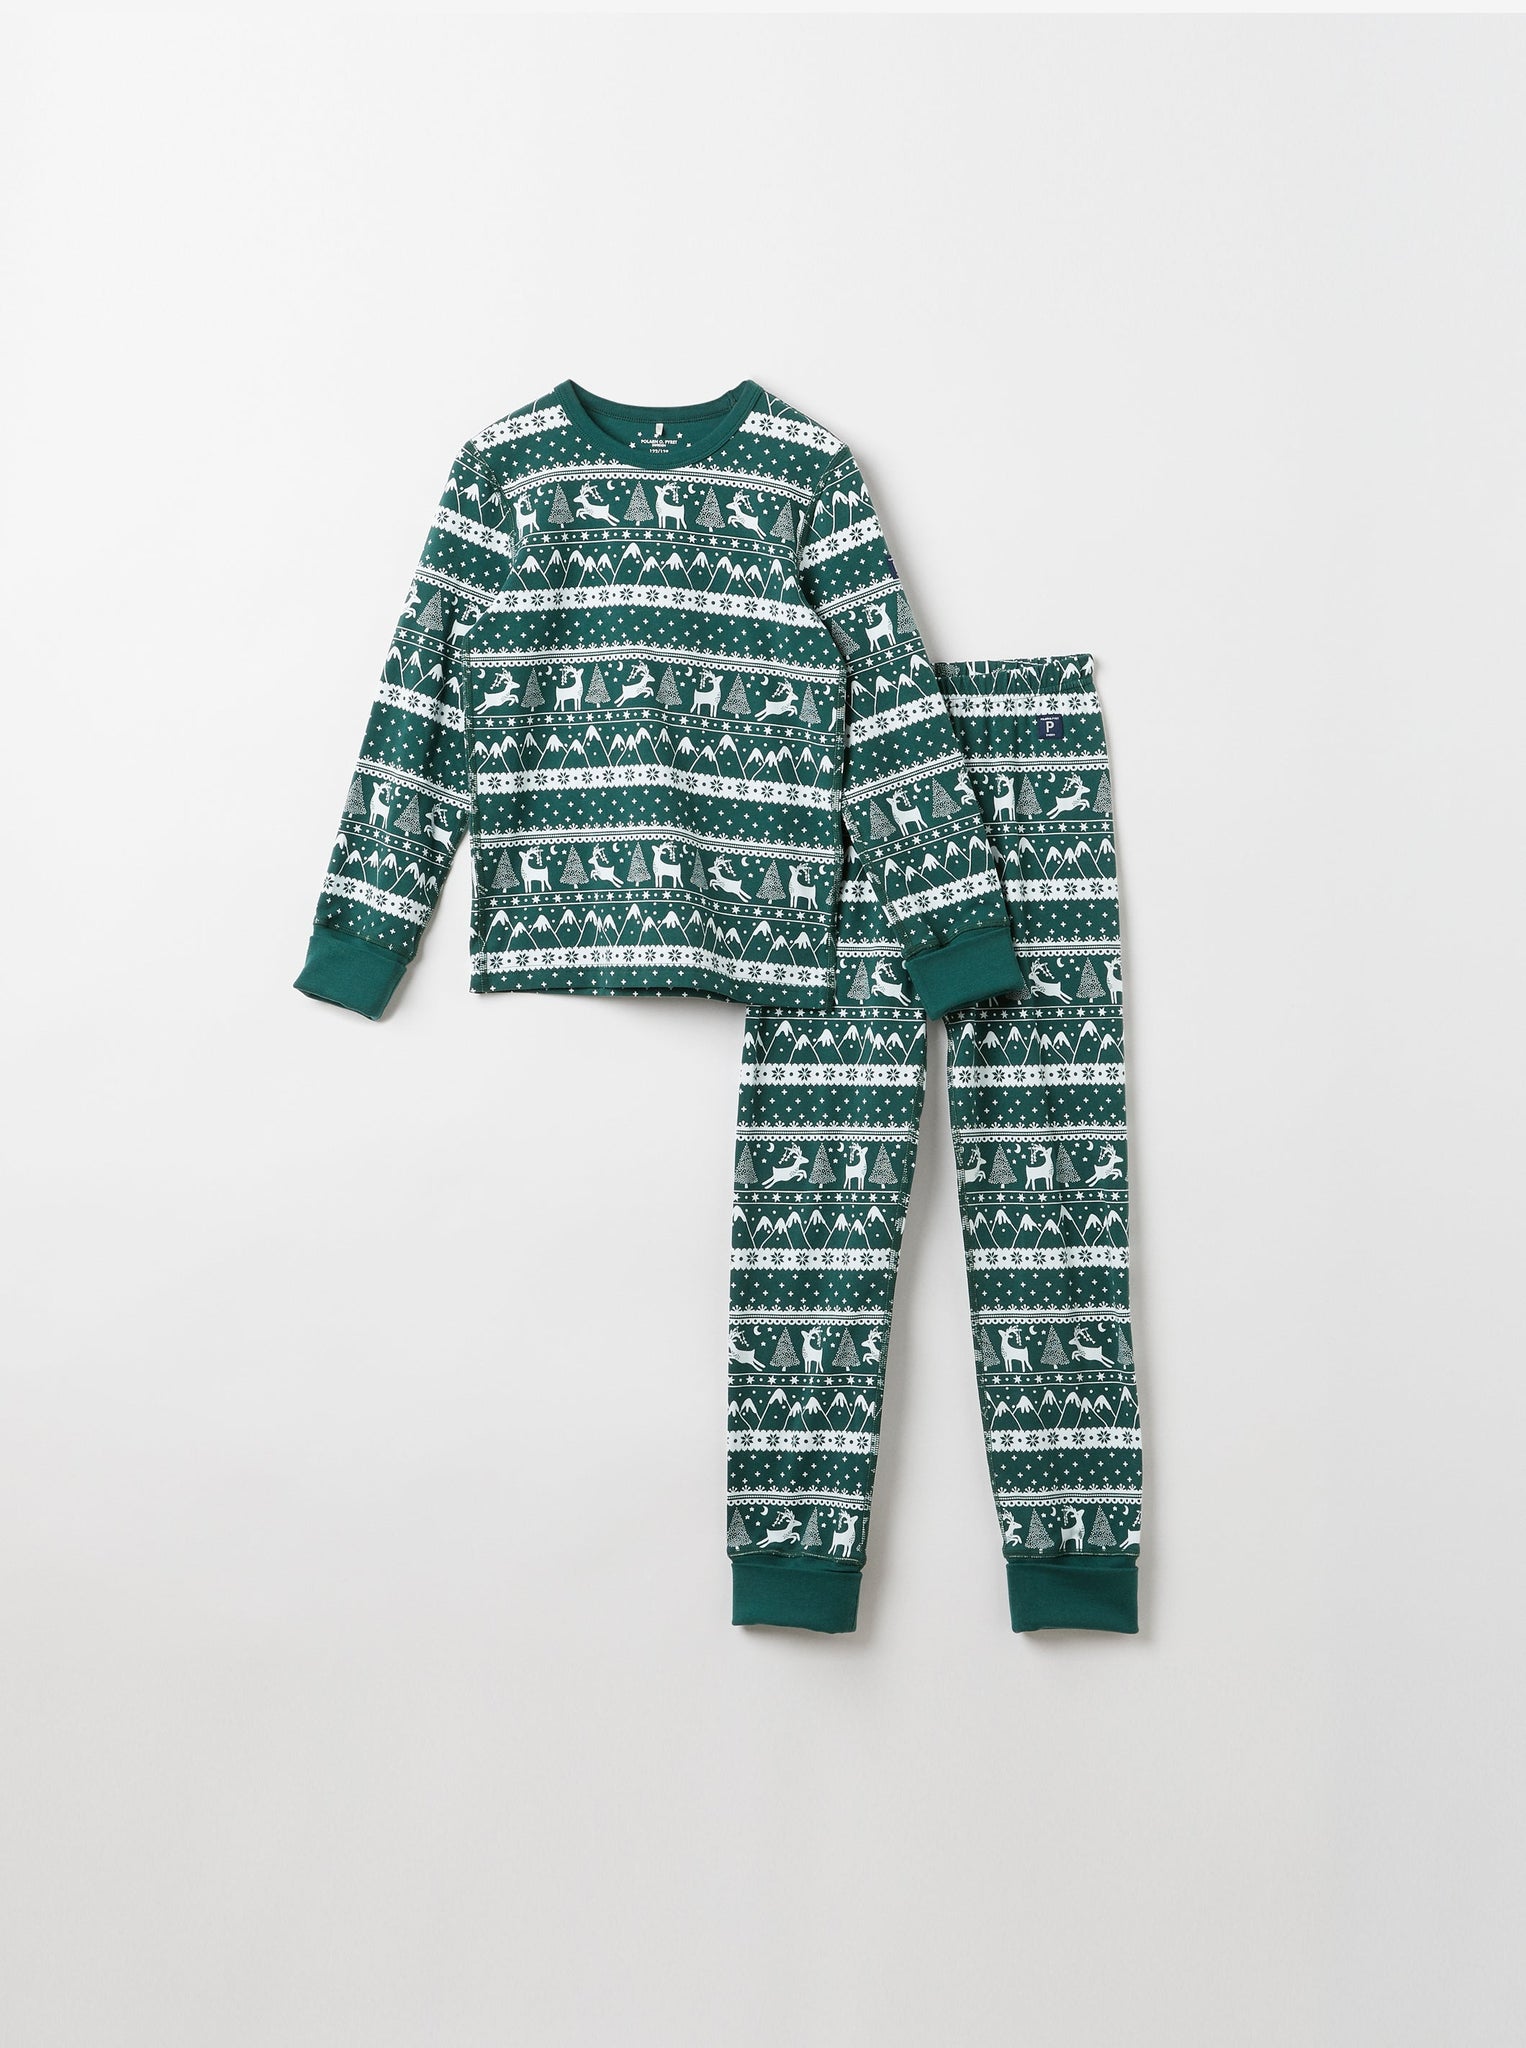 Organic Cotton Kids Christmas Pyjamas from the Polarn O. Pyret kidswear collection. The best ethical kids clothes